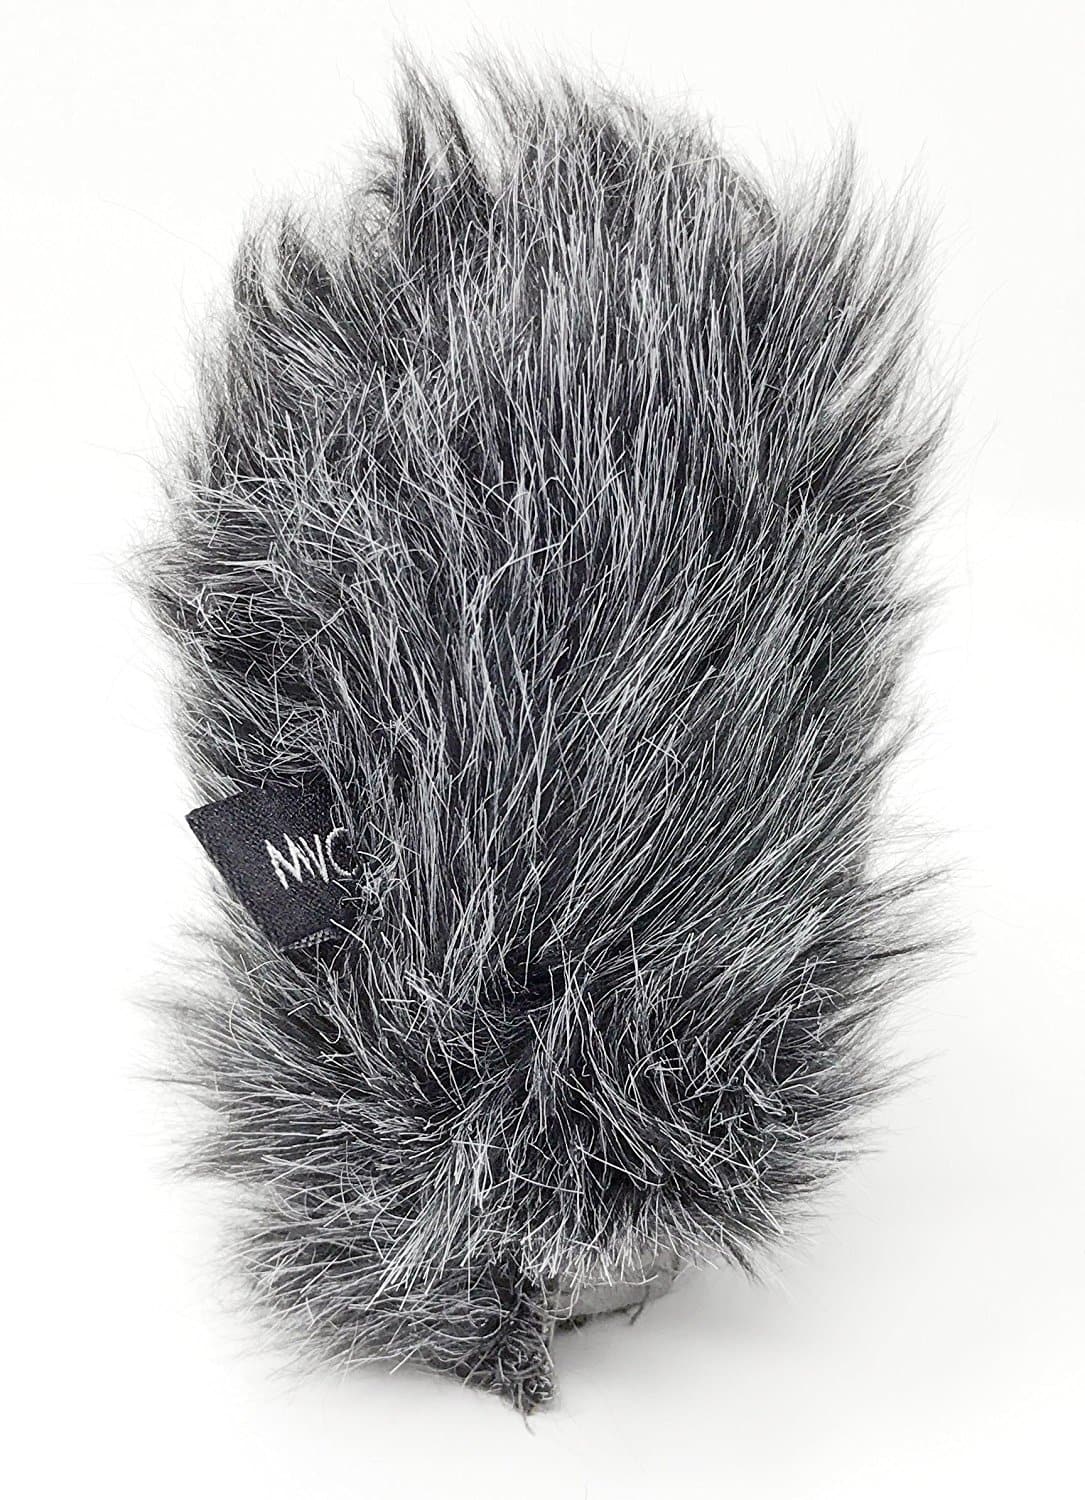 Furry Outdoor Mic Windscreen for Sennheiser MKE 400 | WS-G6 | Movo - Movo